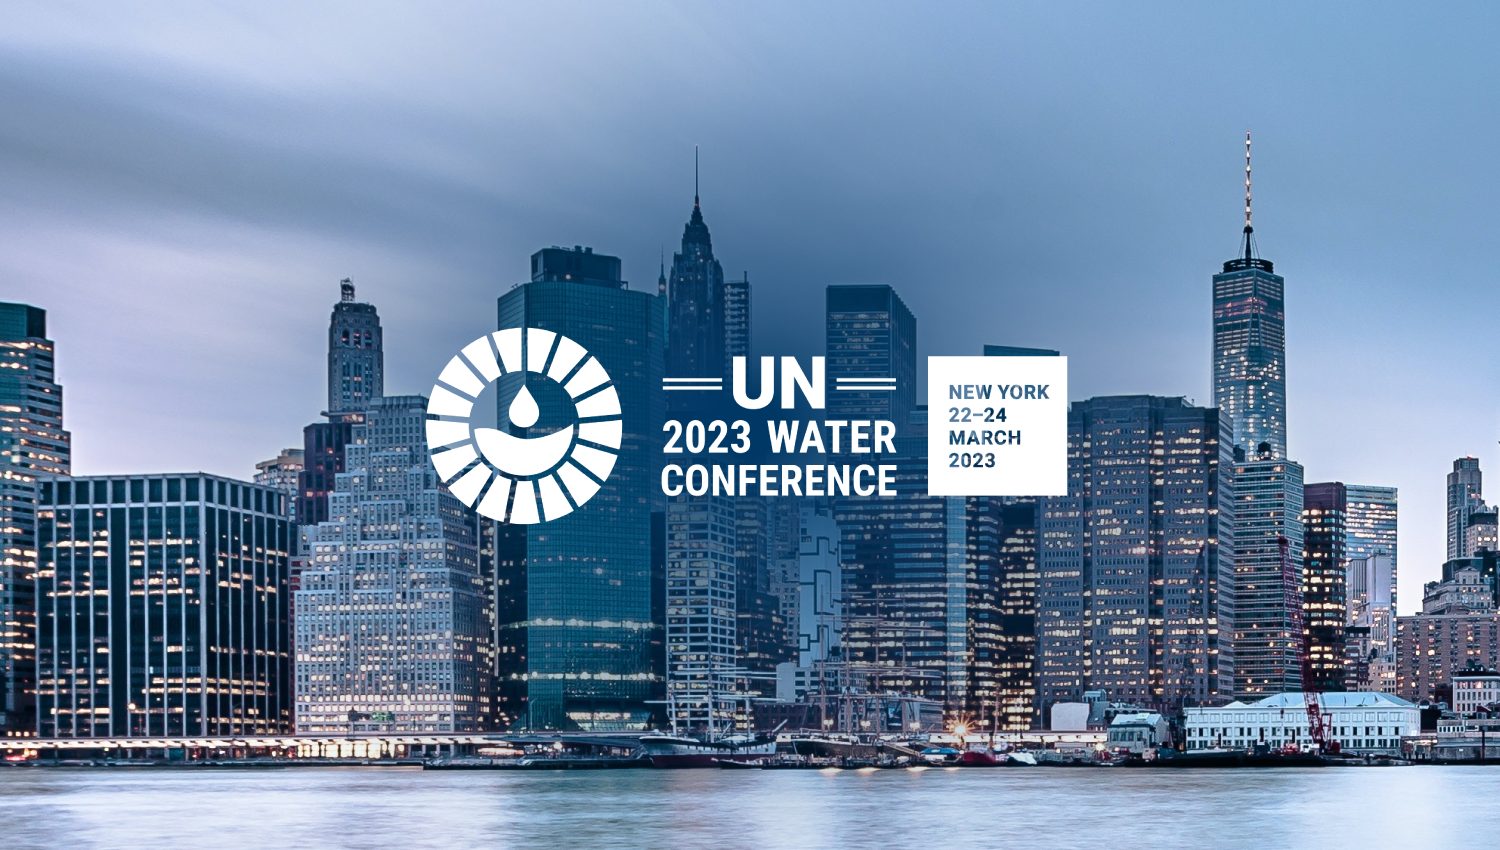 New York City skyline over the water. With the logo of the UN 2023 Water Conference on top.